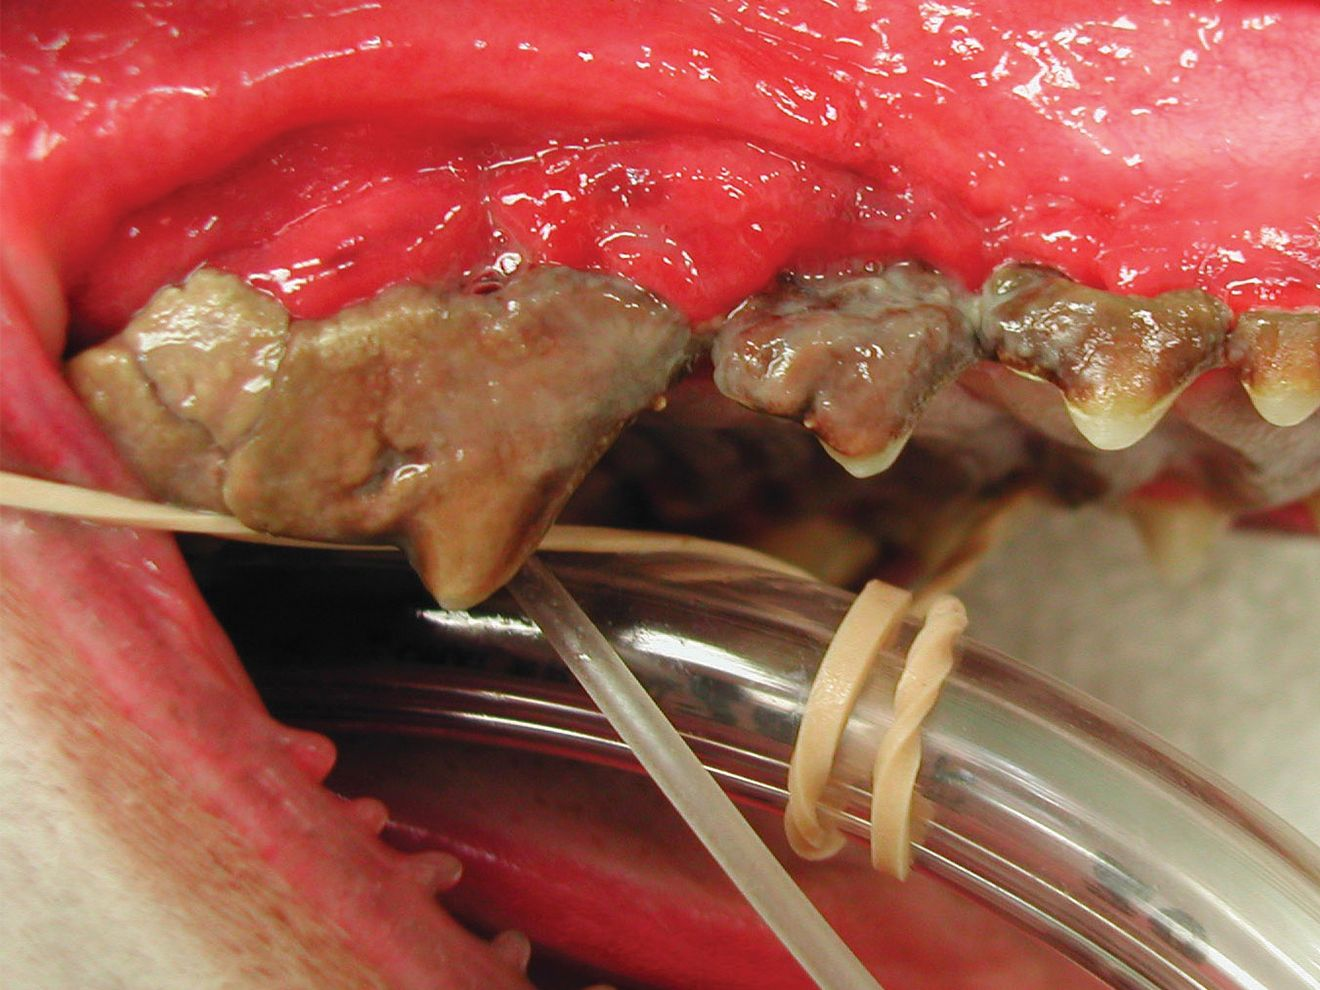 Stage 4 of canine dental disease